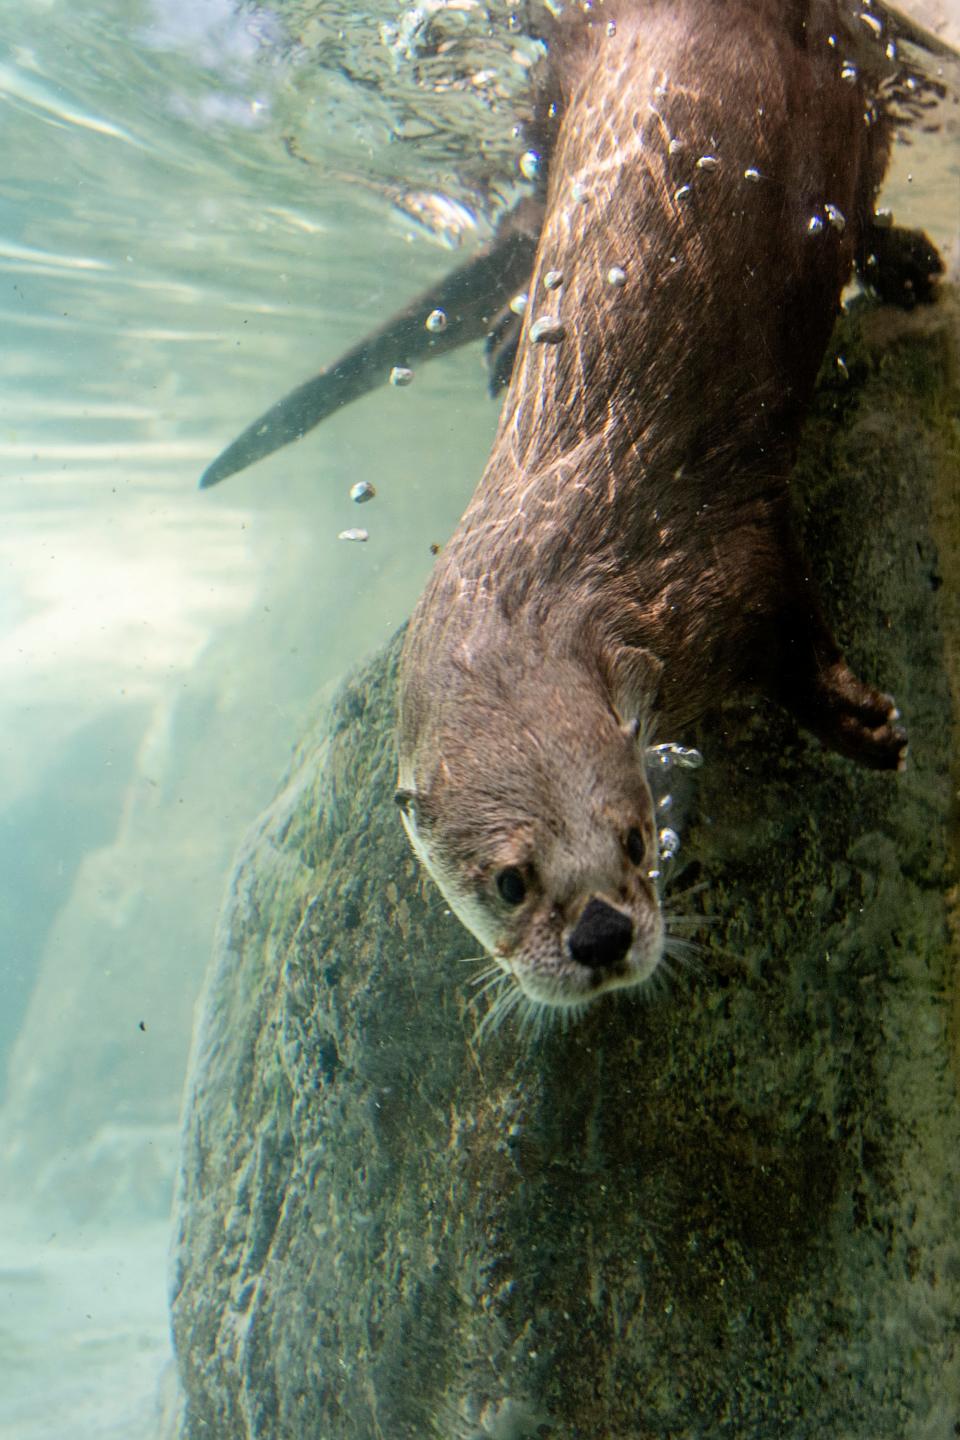 An otter dives into the water at the WNC Nature Center June 2, 2022.